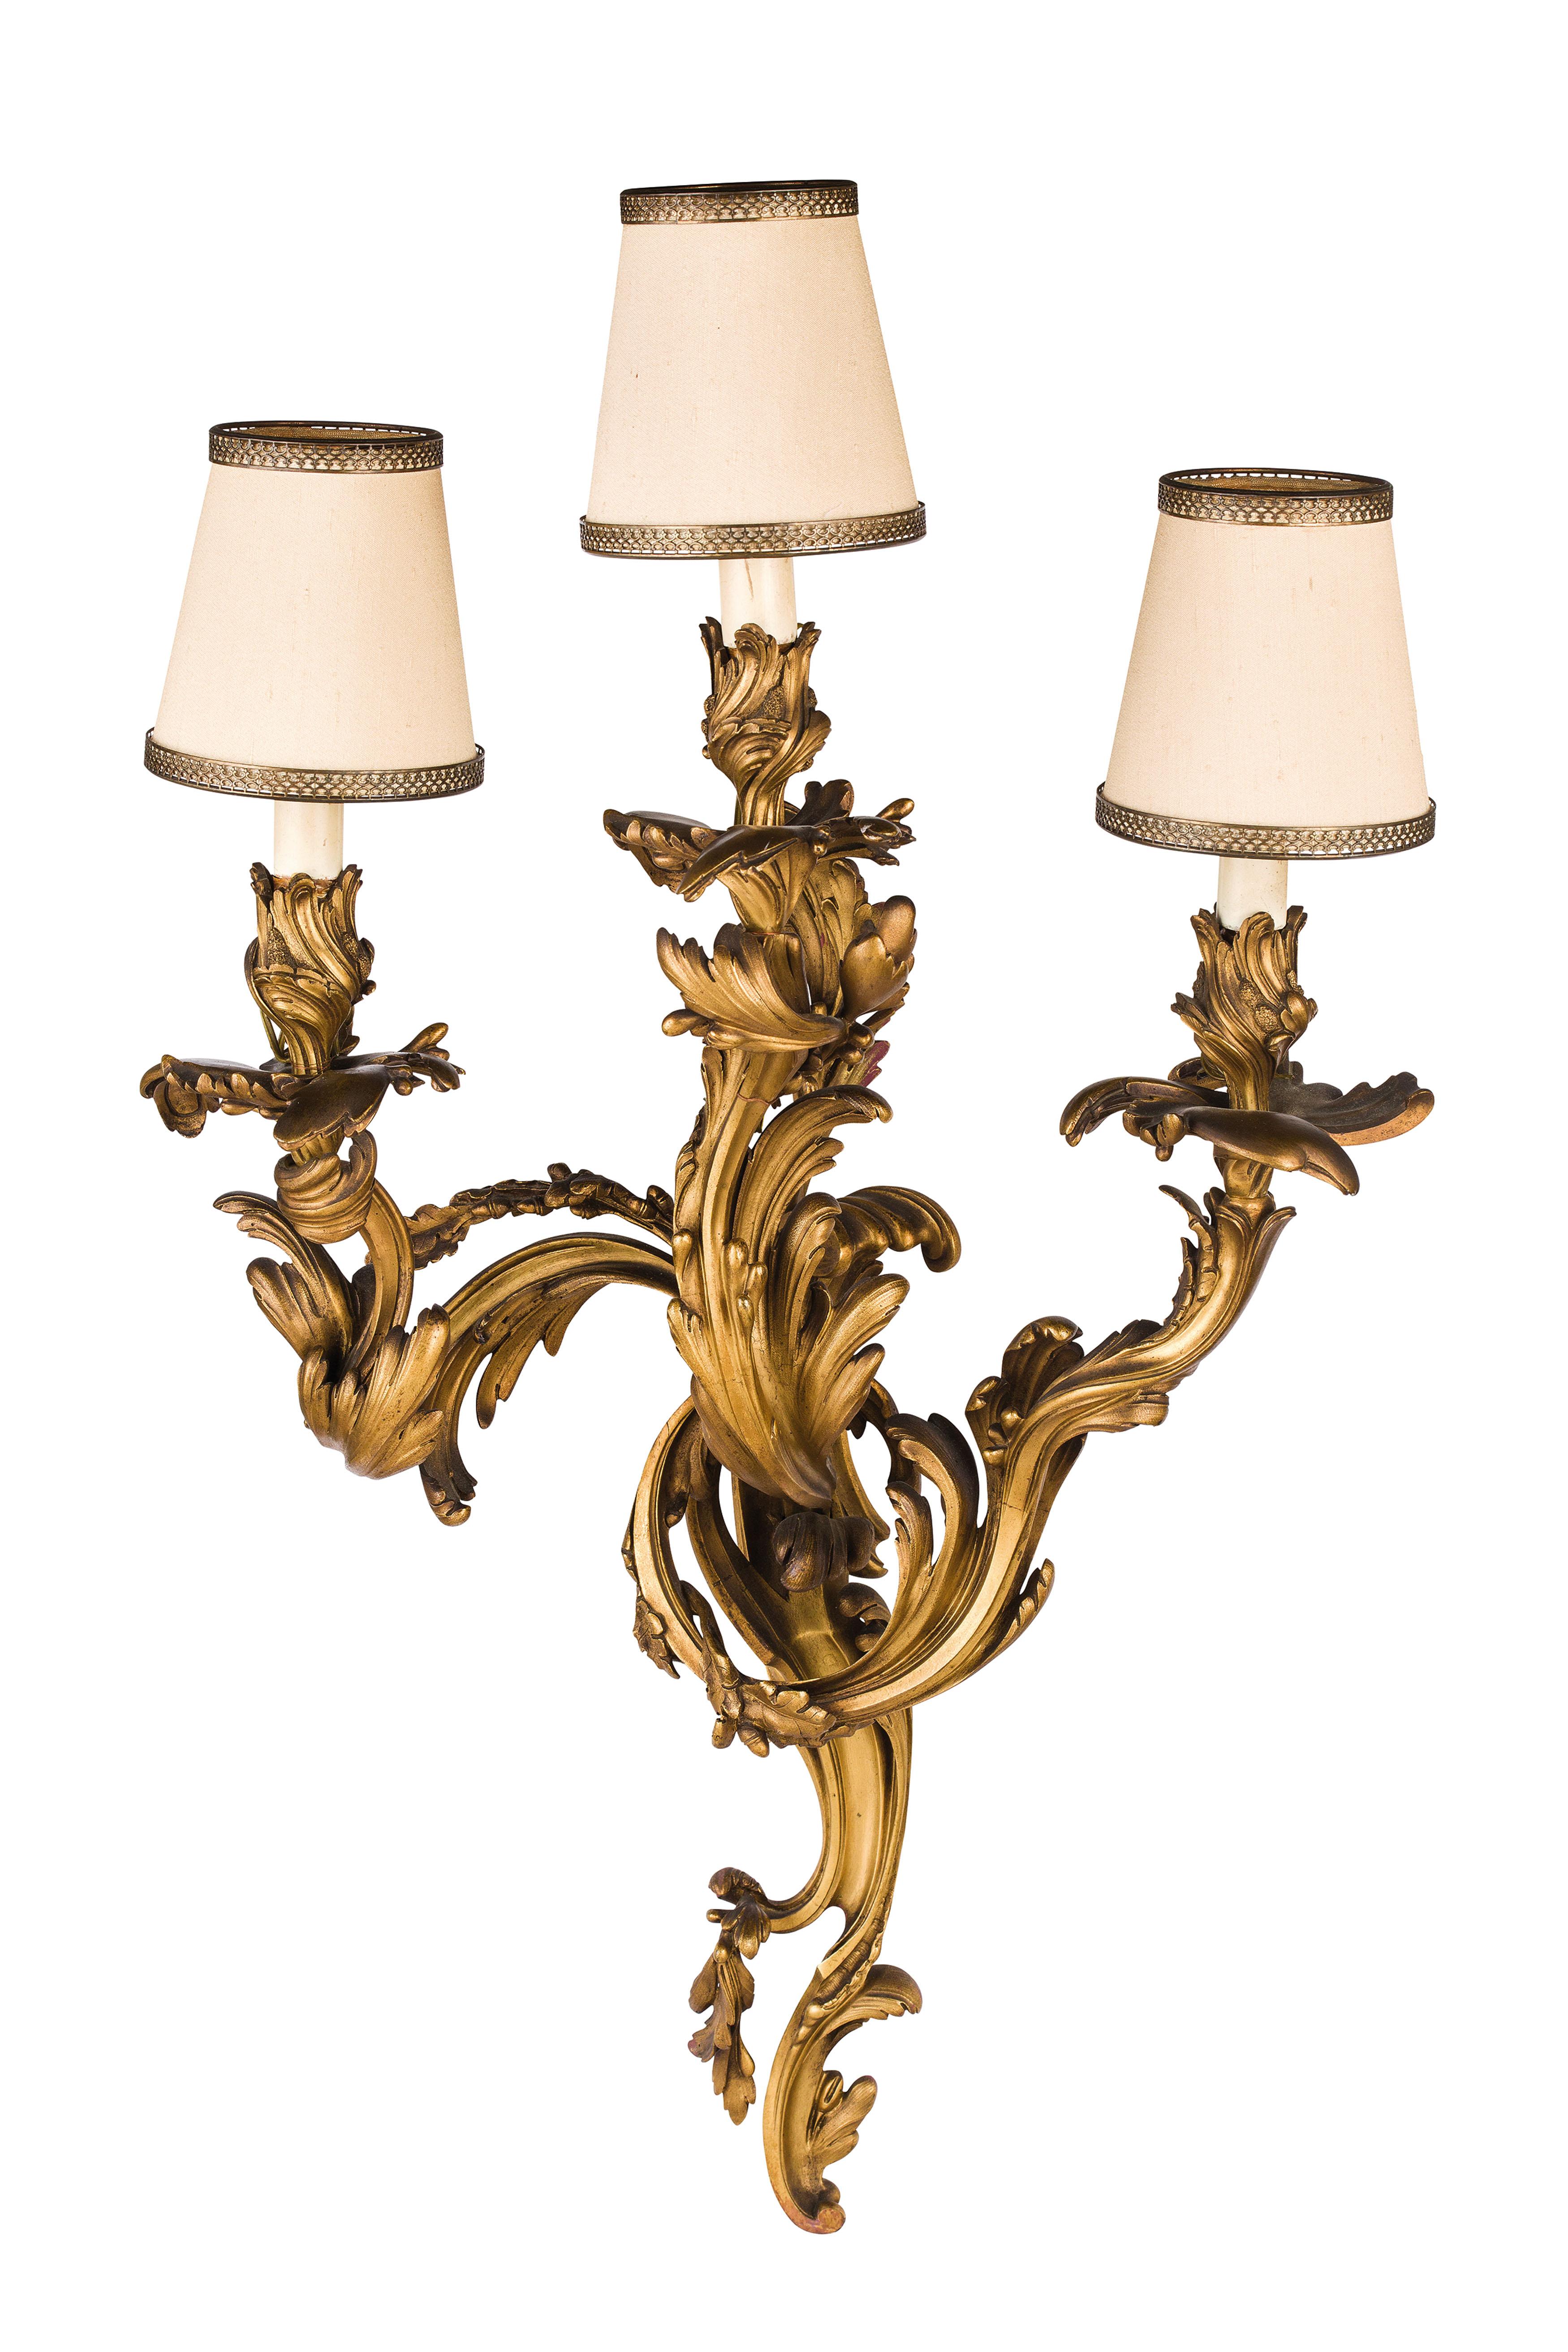 19th century, pair of French Louis XV style three-light gilt bronze applique

The important pair of three lights wall appliques is made in gilt bronze, finely chiselled with foliate decorations. It was made in France in the 19th century, inspired